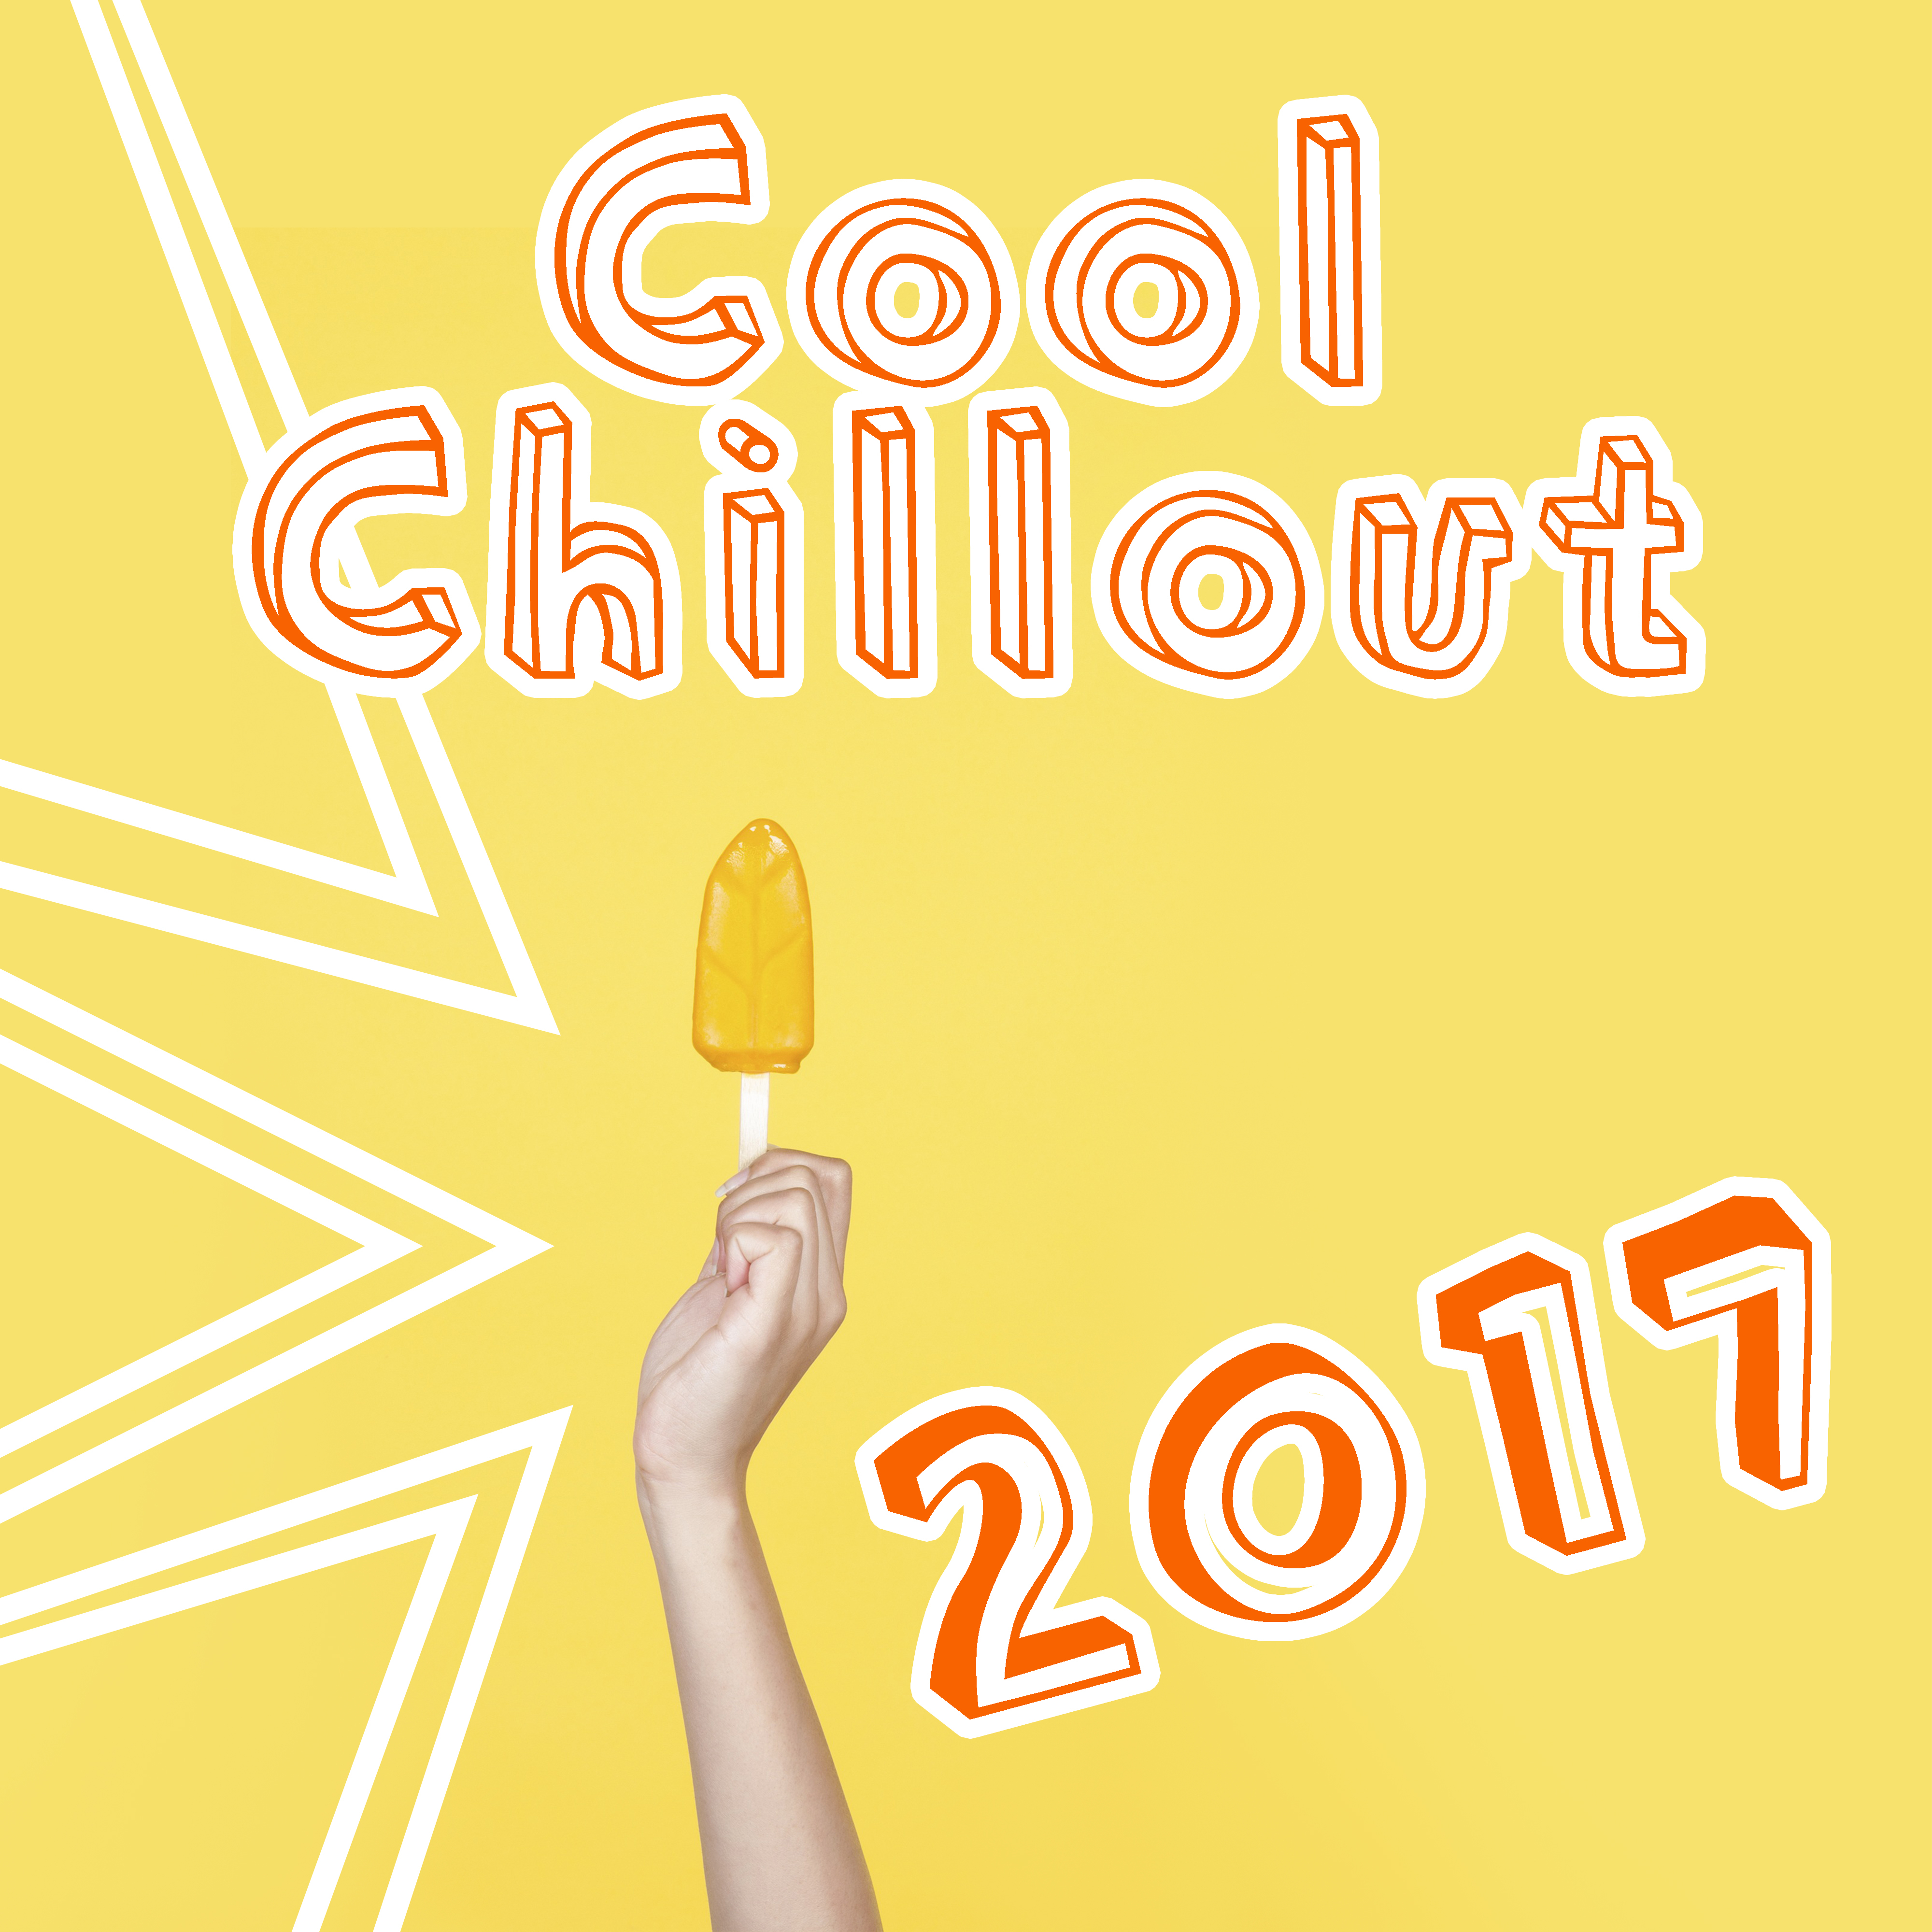 Cool Chillout 2017 – Chill Out Music, Relax & Chill, Ibiza, Party Hits 2017, Summertime